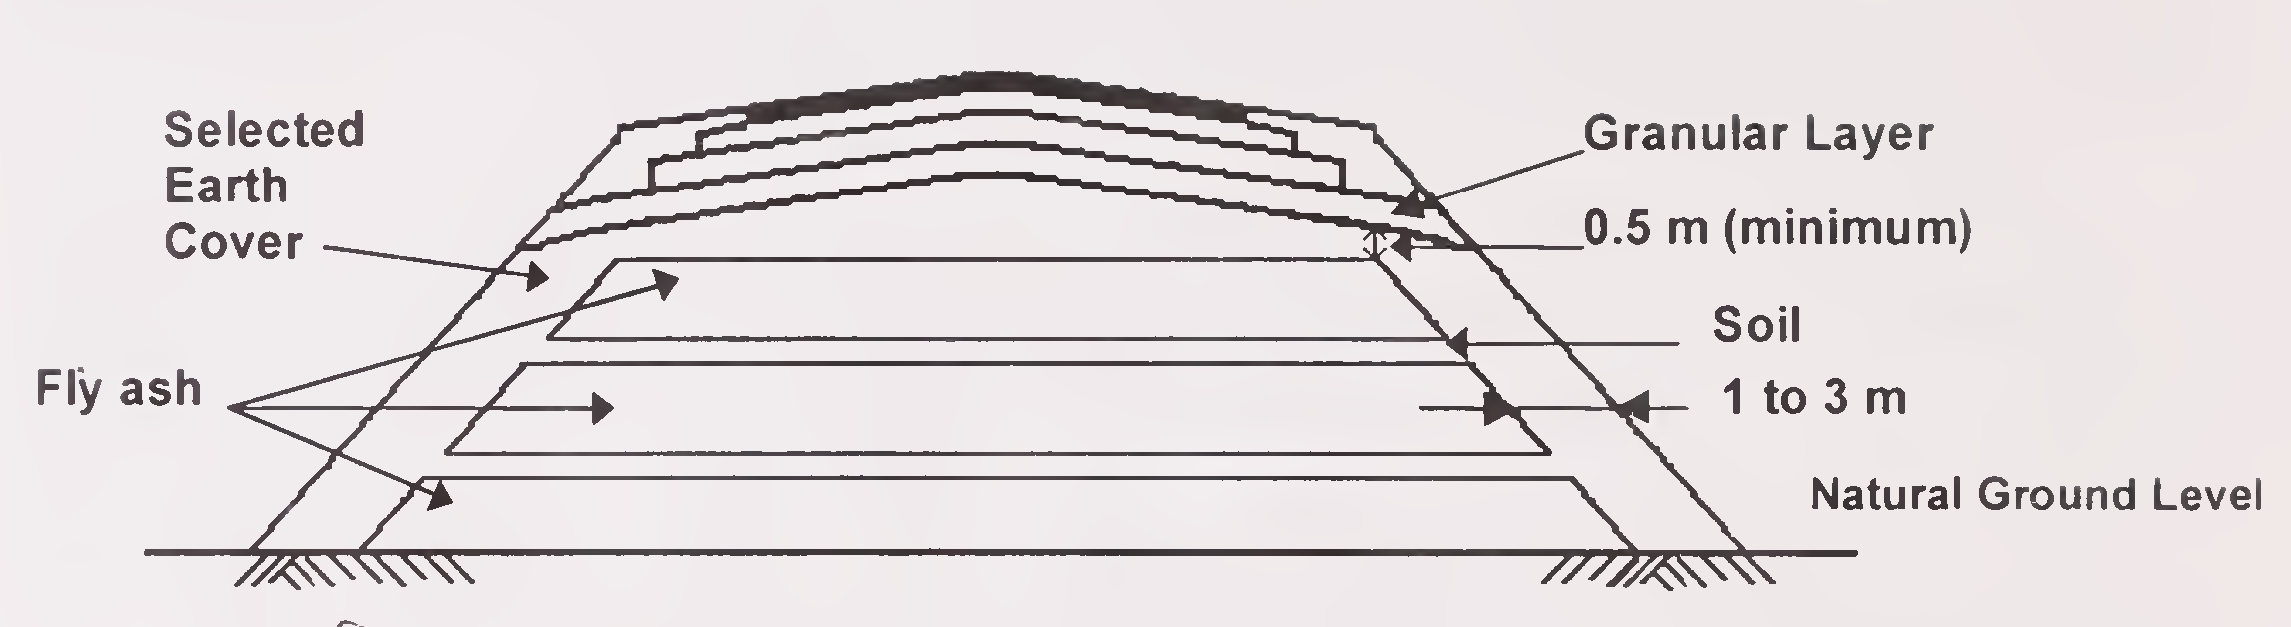 Fig. I. Typical Cross-Section of Embankment with Alternate Layer of Fly Ash and Soil